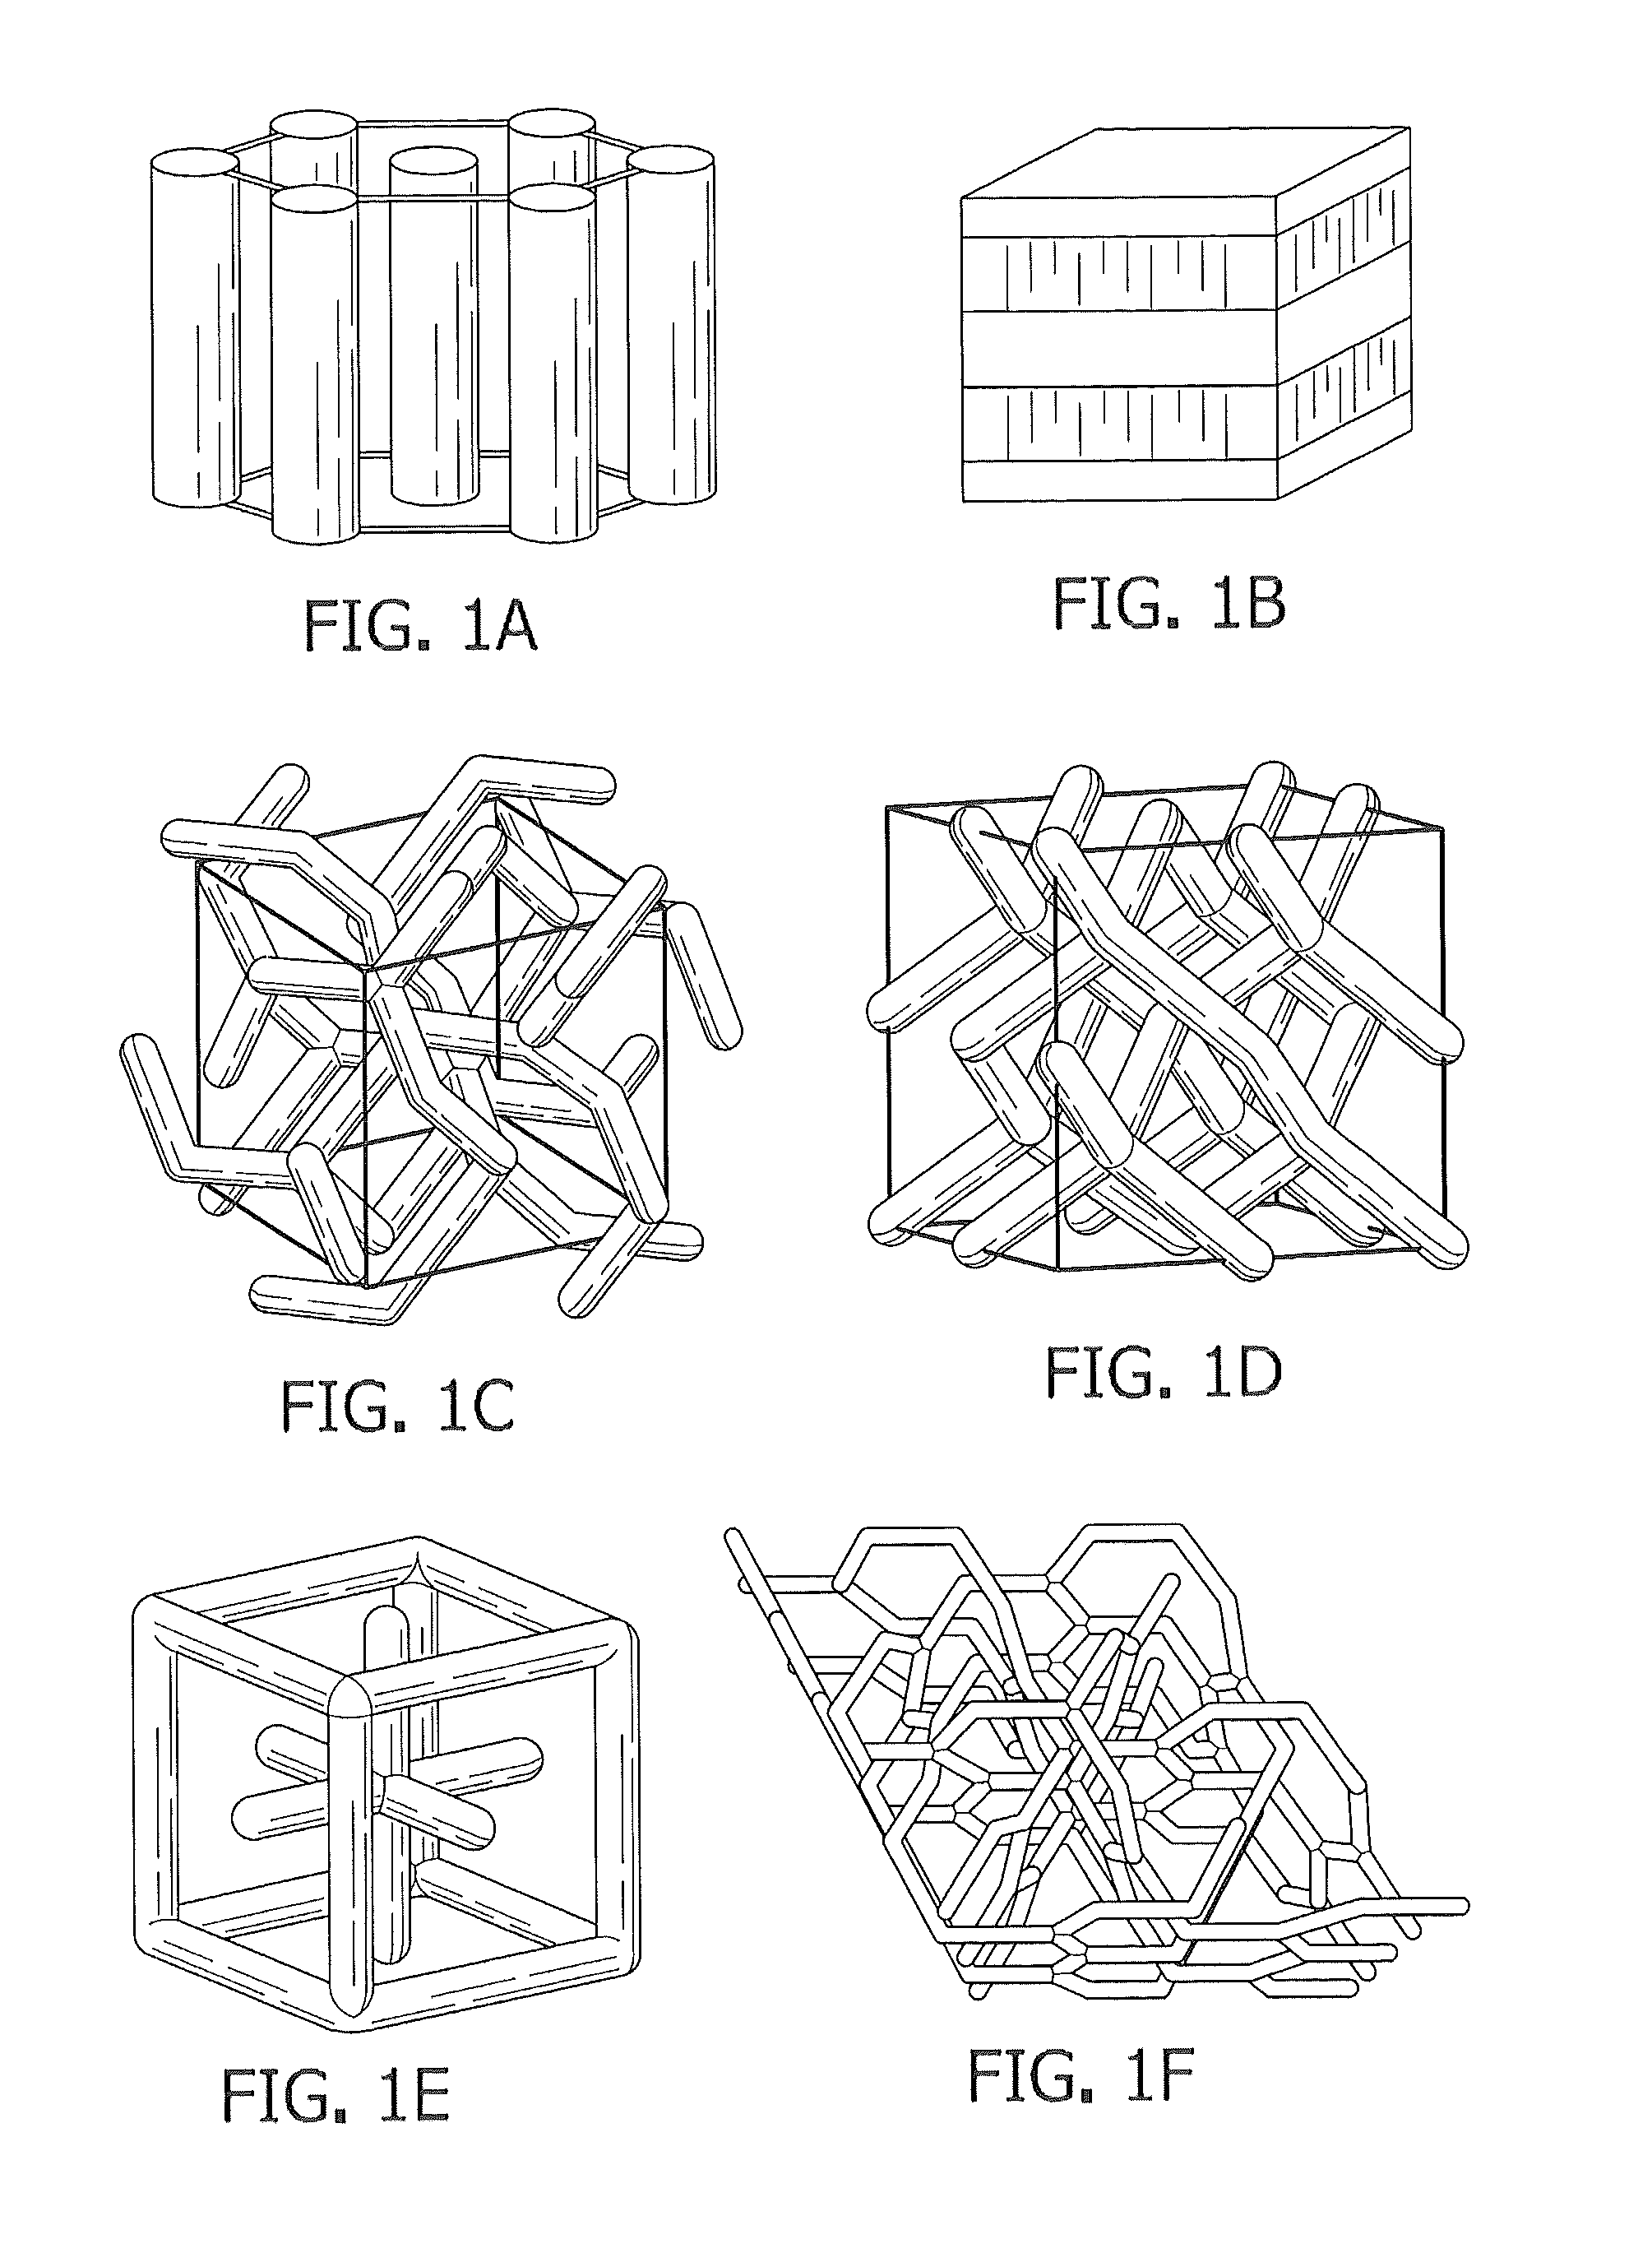 Polymerizable mixtures containing ionic gemini surfactants; and lyotropic liquid crystals, polymers, and membranes made therefrom